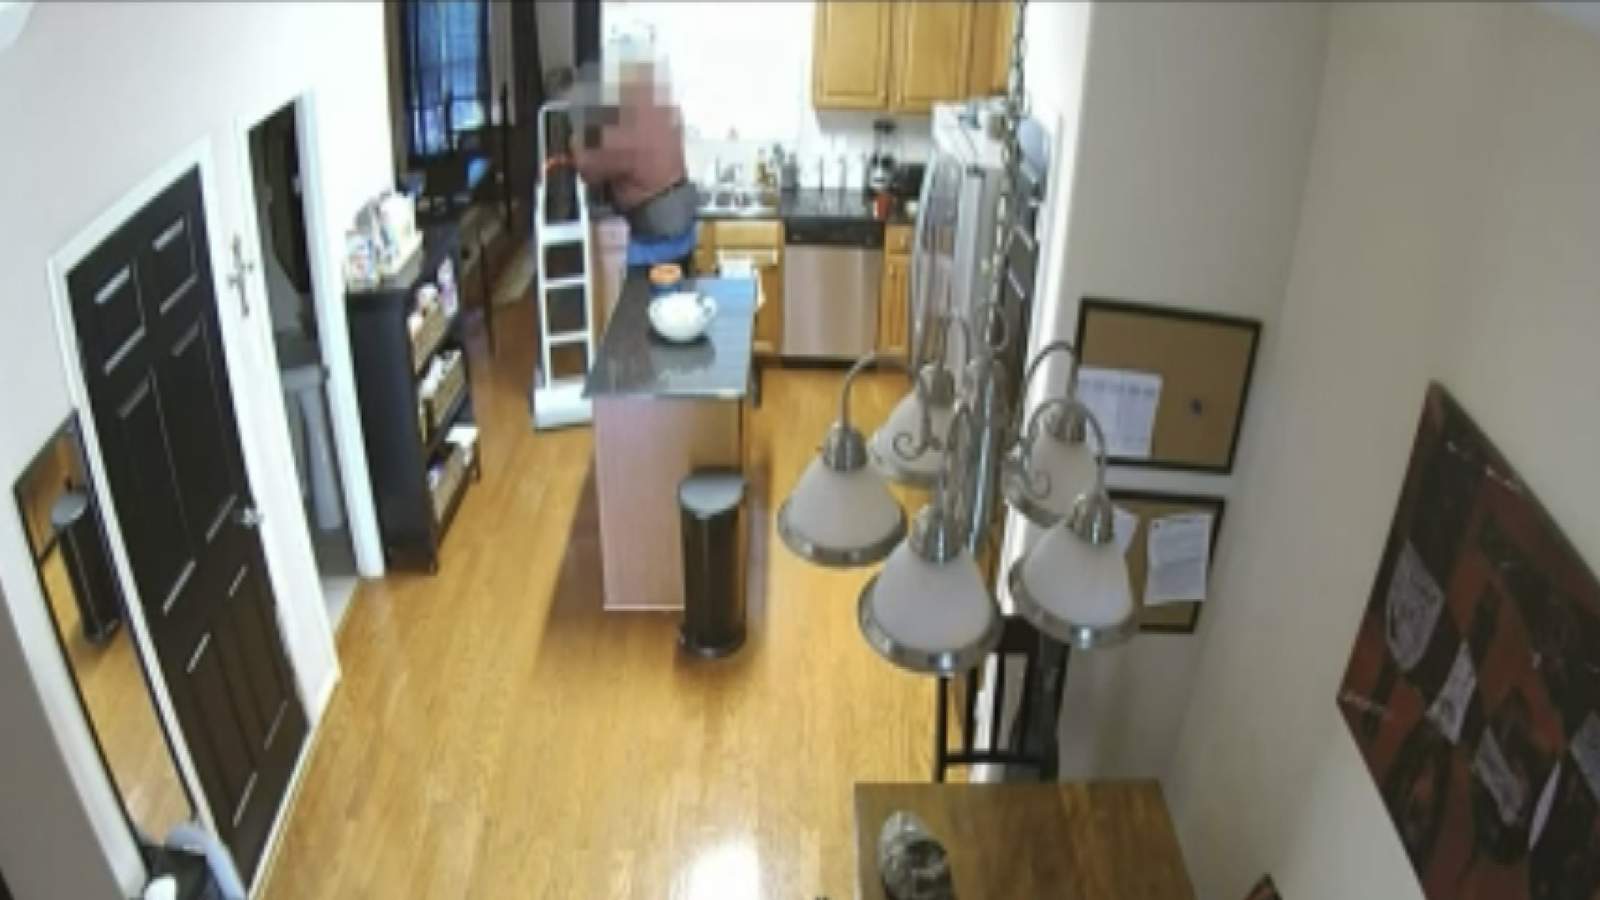 Delivery man who swipes child’s medication caught red-handed on home’s security cams